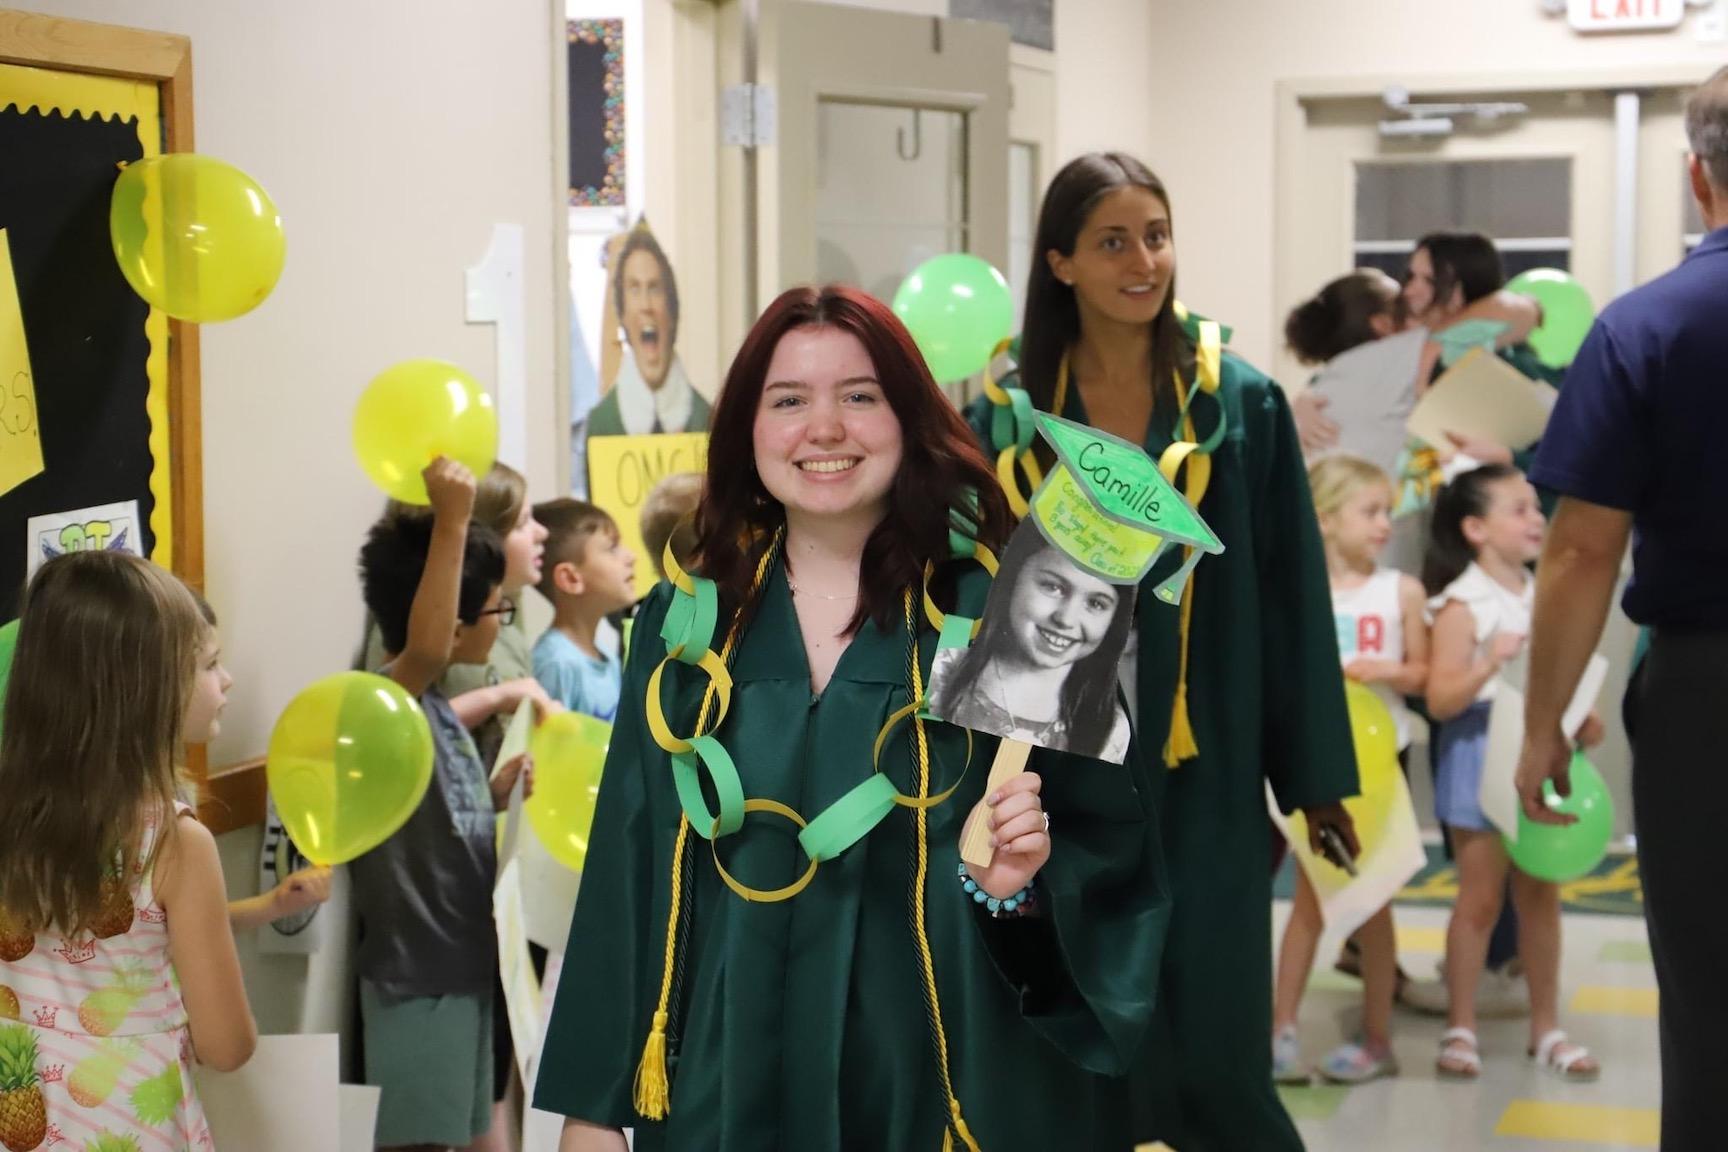 Camille Petrulak and Lillian Palladino parade through McCullough Elementary, which presented each of its seniors with a paper necklace to mark the occasion